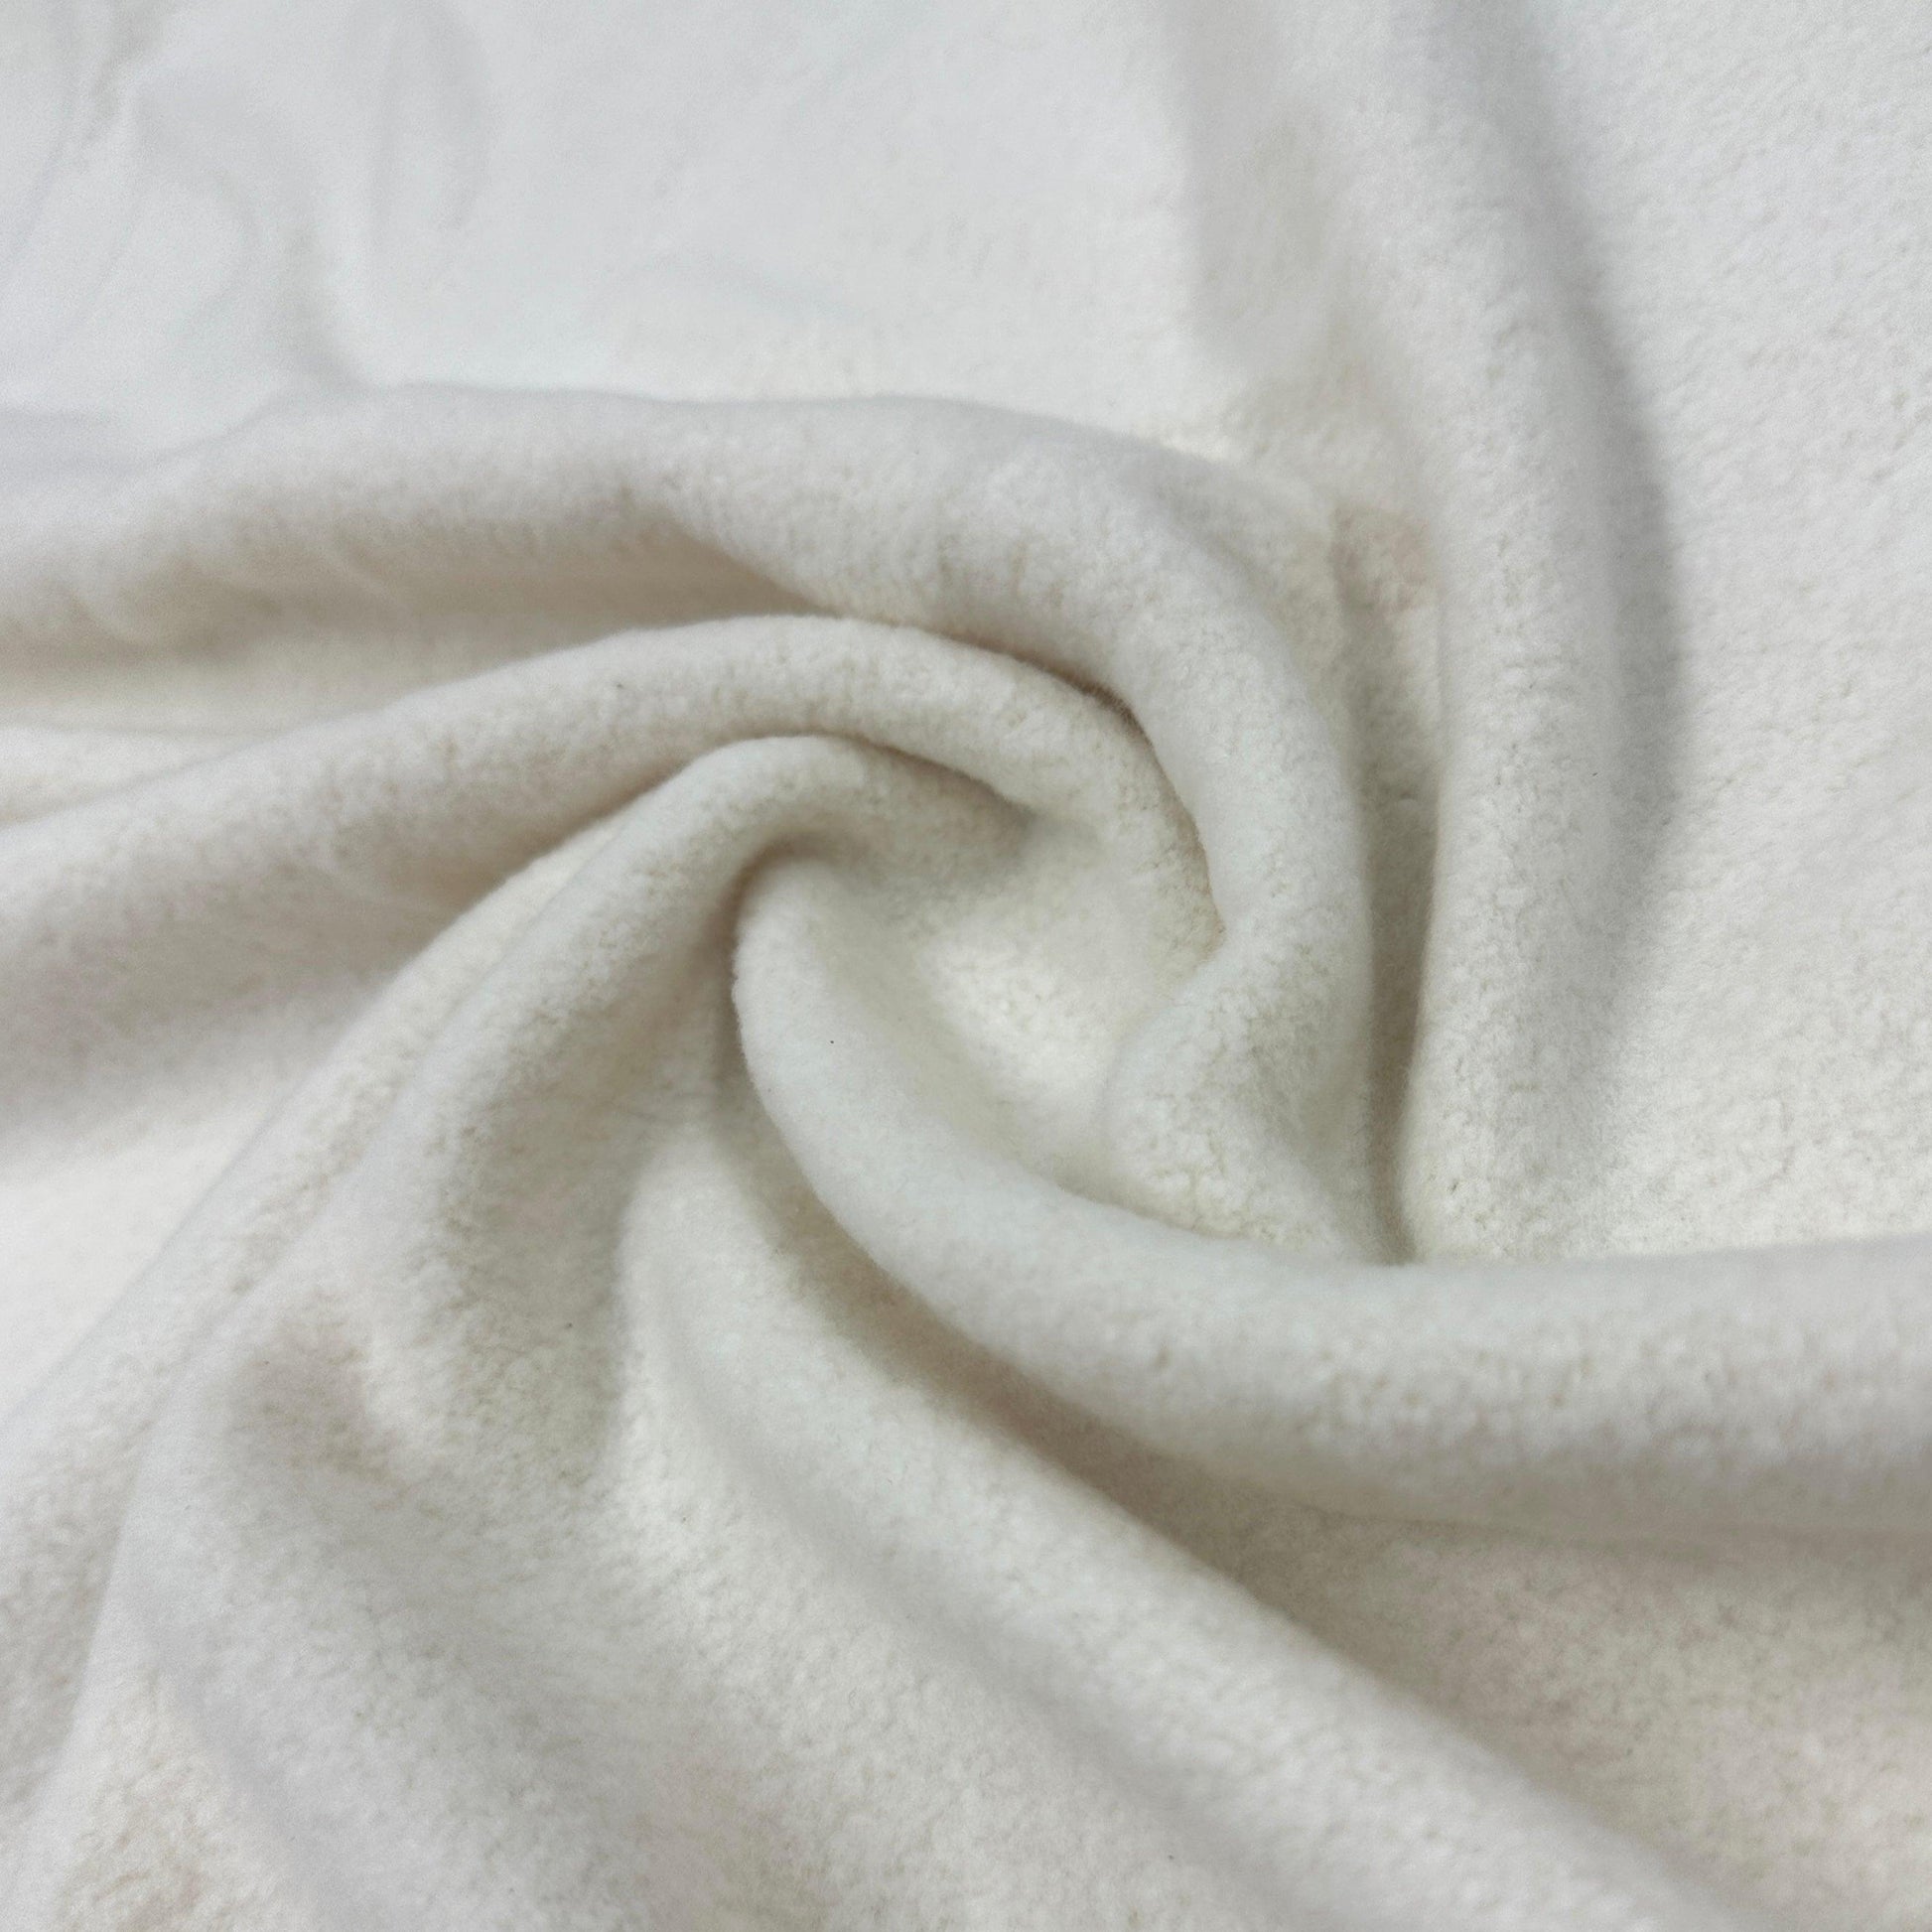 Natural Organic Cotton Sherpa Fabric - 400 GSM - Knit in the USA - Nature's Fabrics